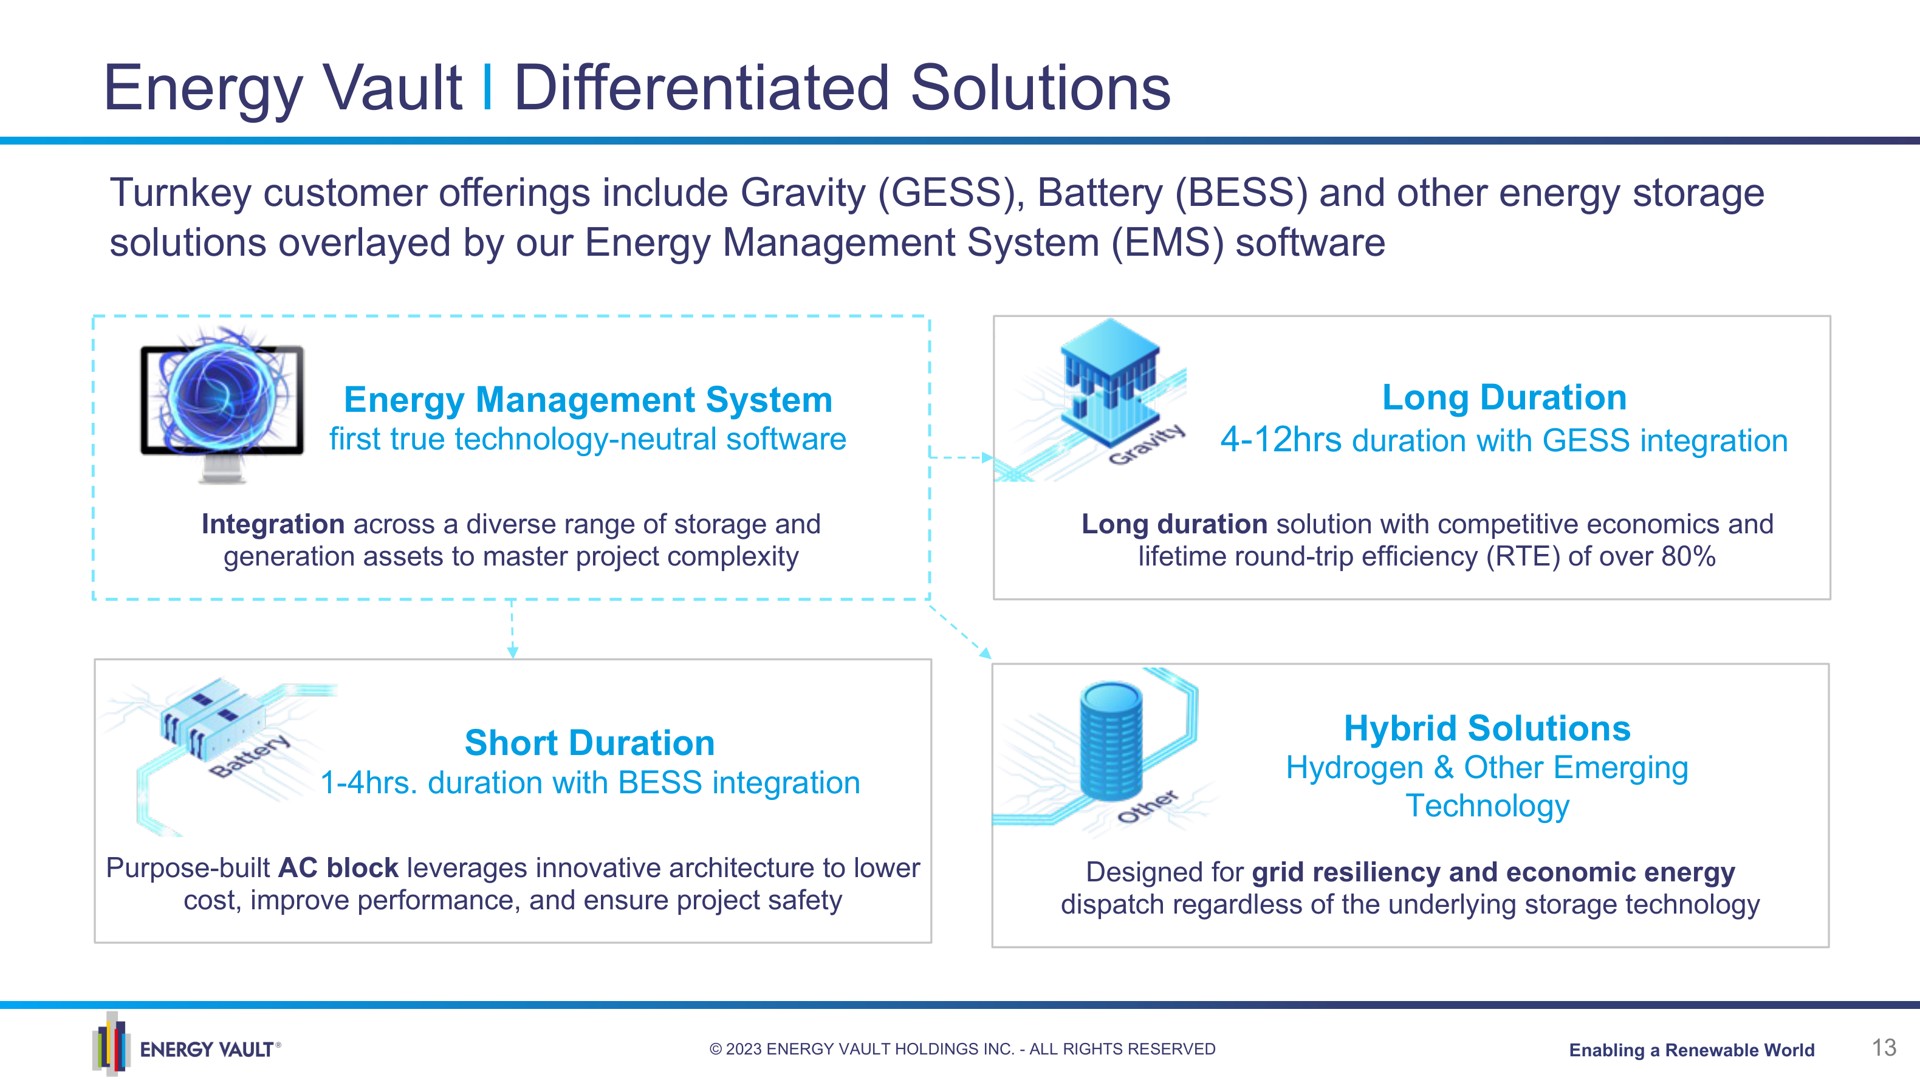 energy vault differentiated solutions | Energy Vault